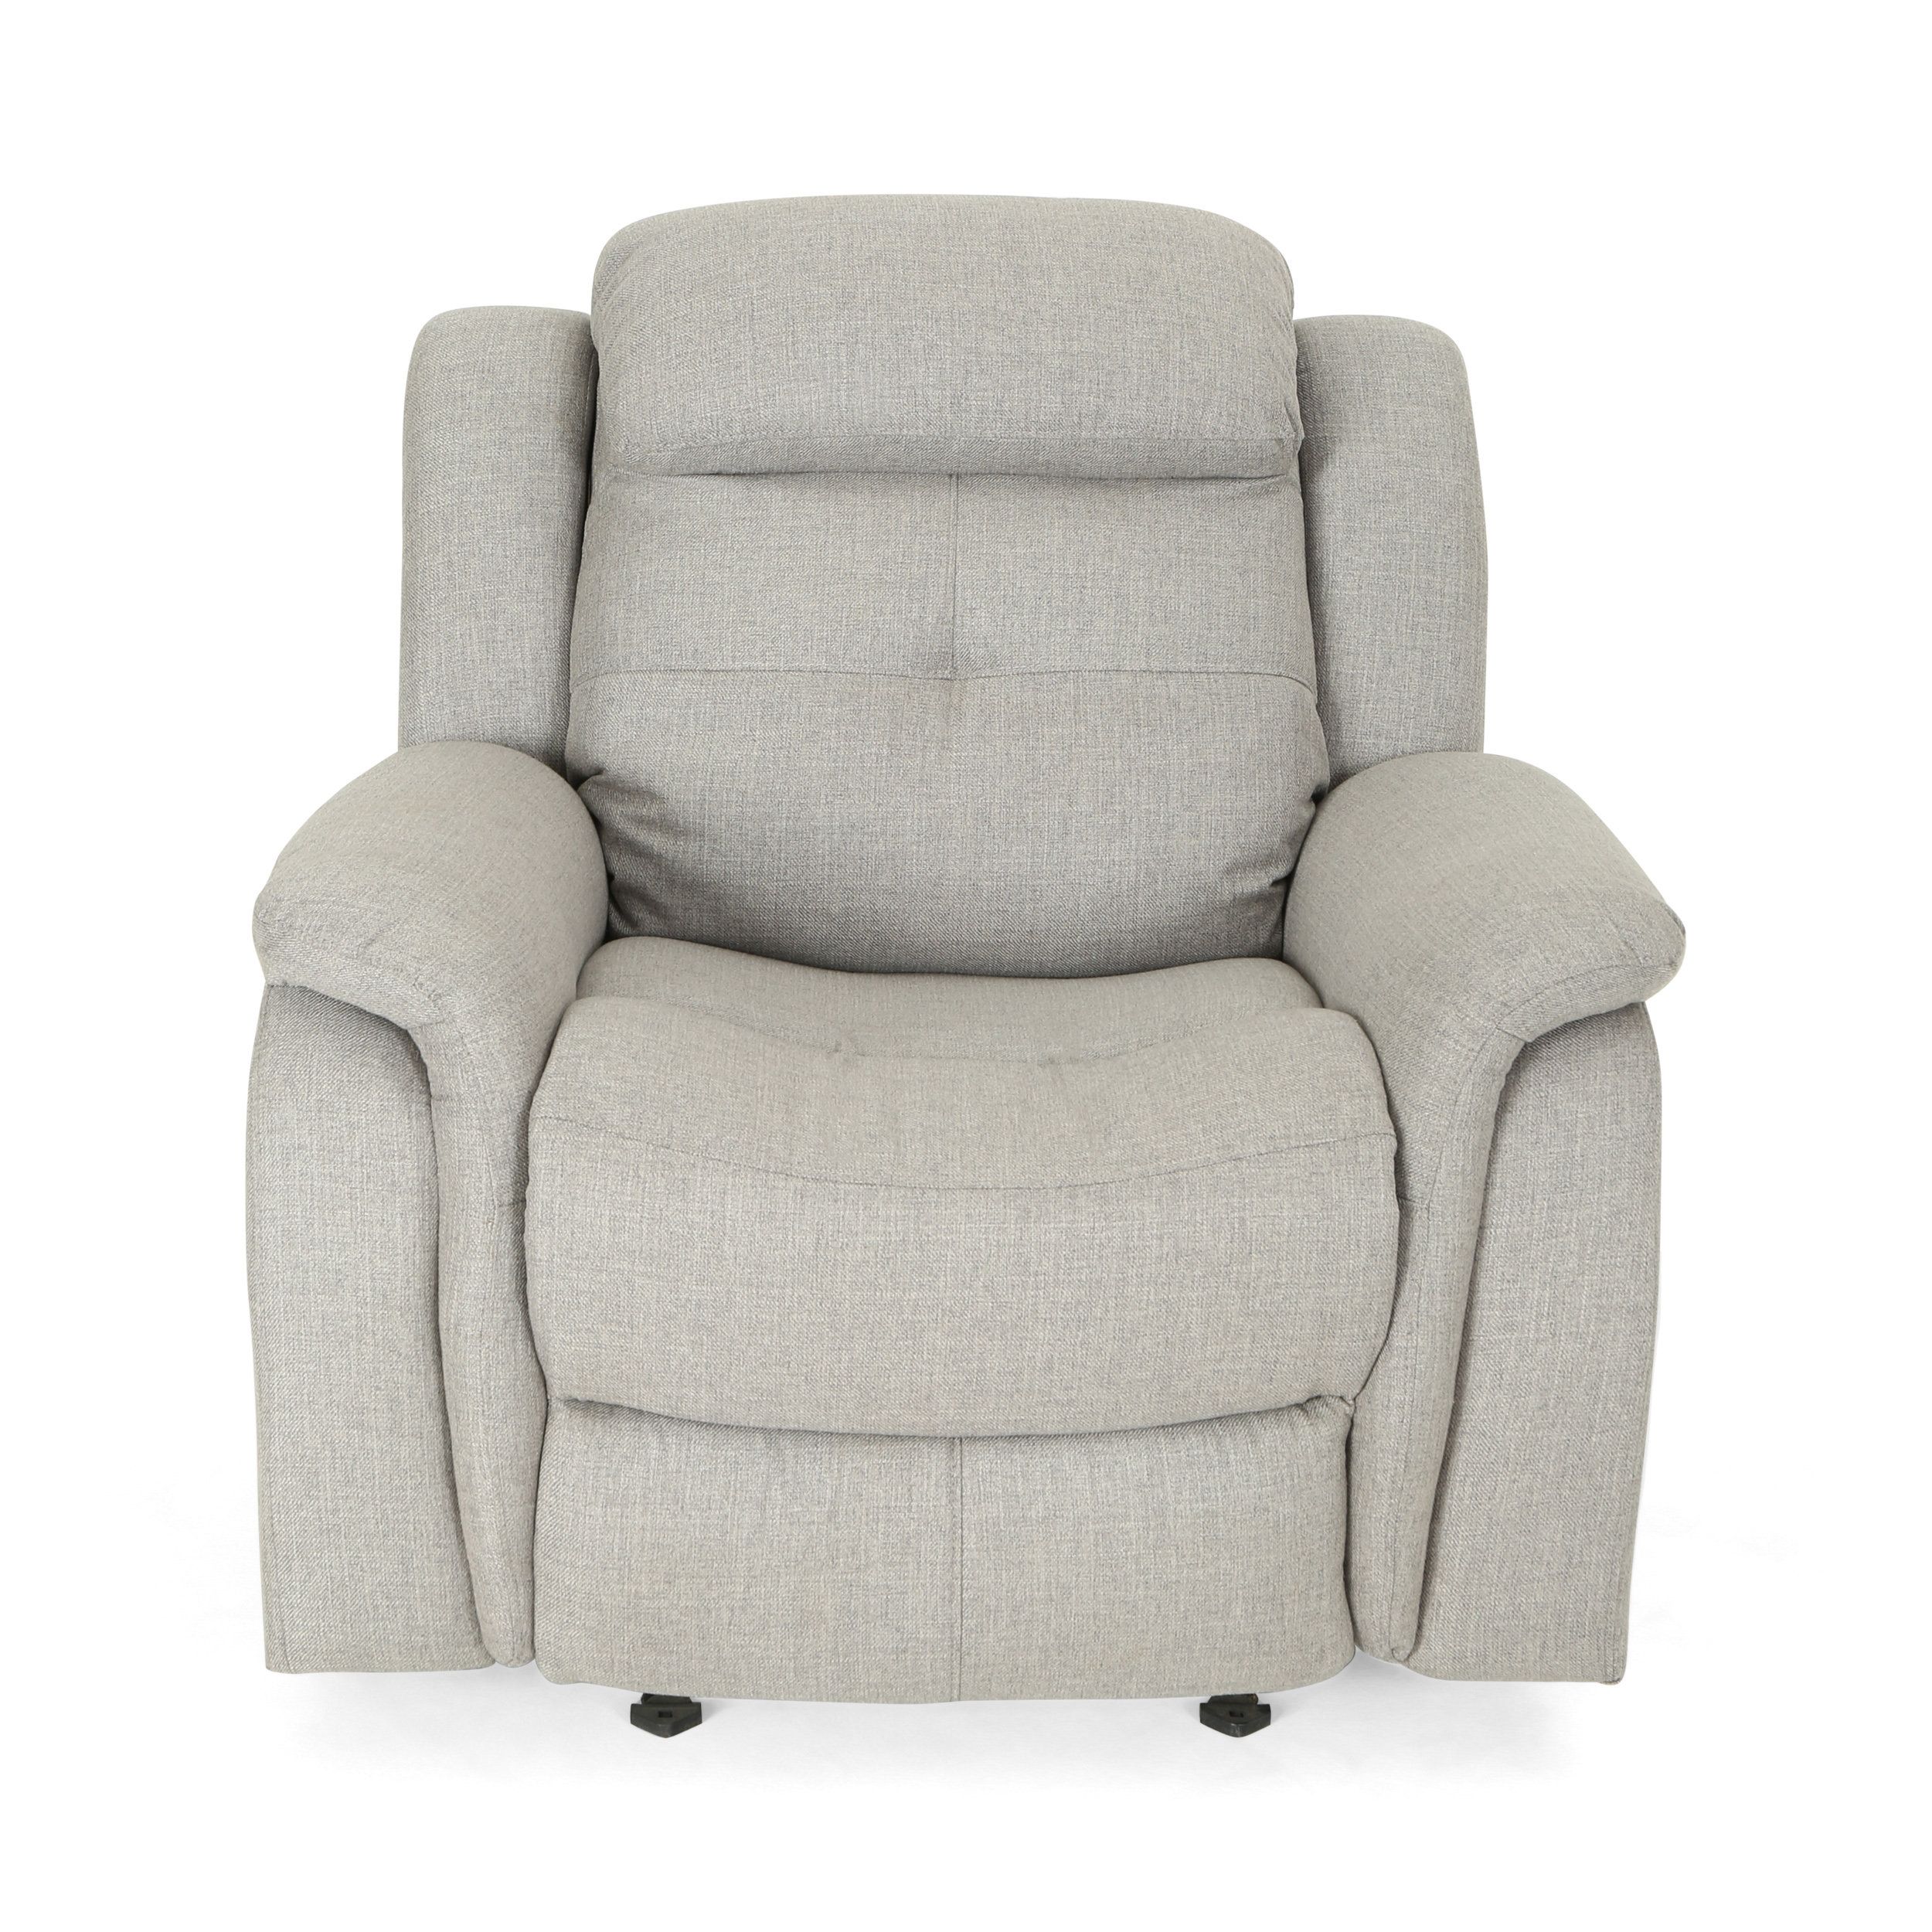 Latitude Run Anndale Traditional Manual Rocking Glider Recliner For Dale Iii Polyurethane Swivel Glider Recliners (View 6 of 20)